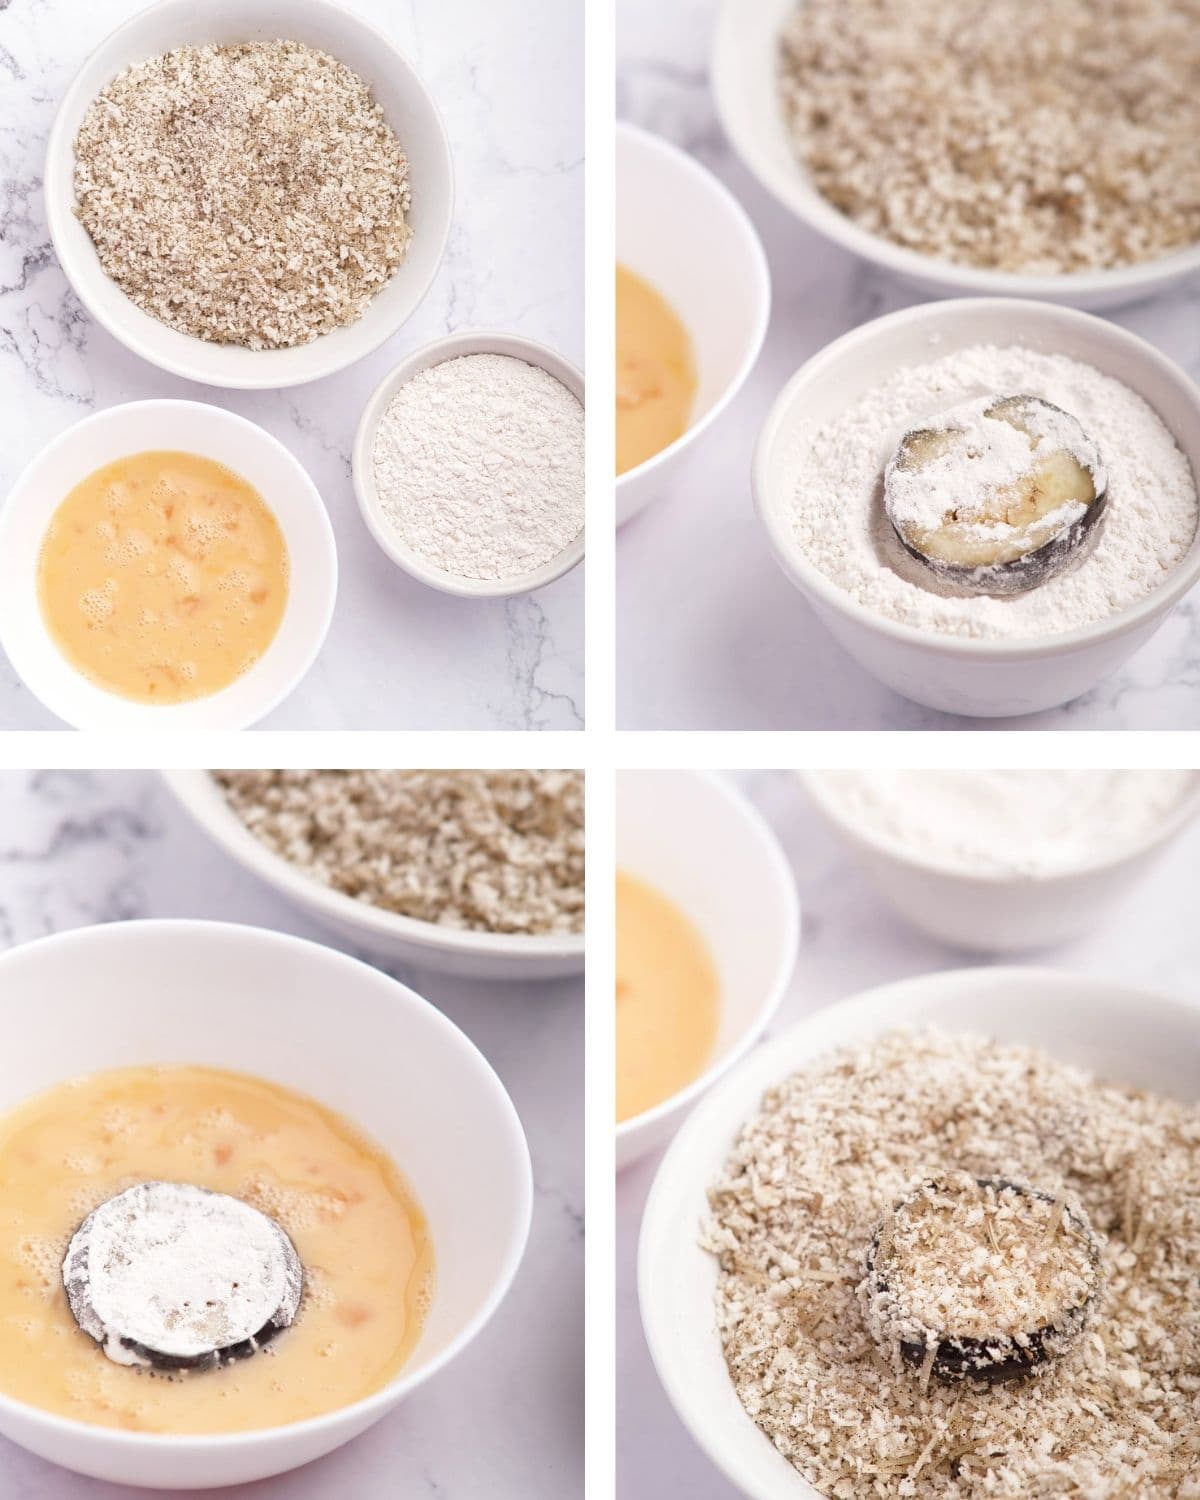 process of dredging eggplant into flour, egg and breadcrumbs